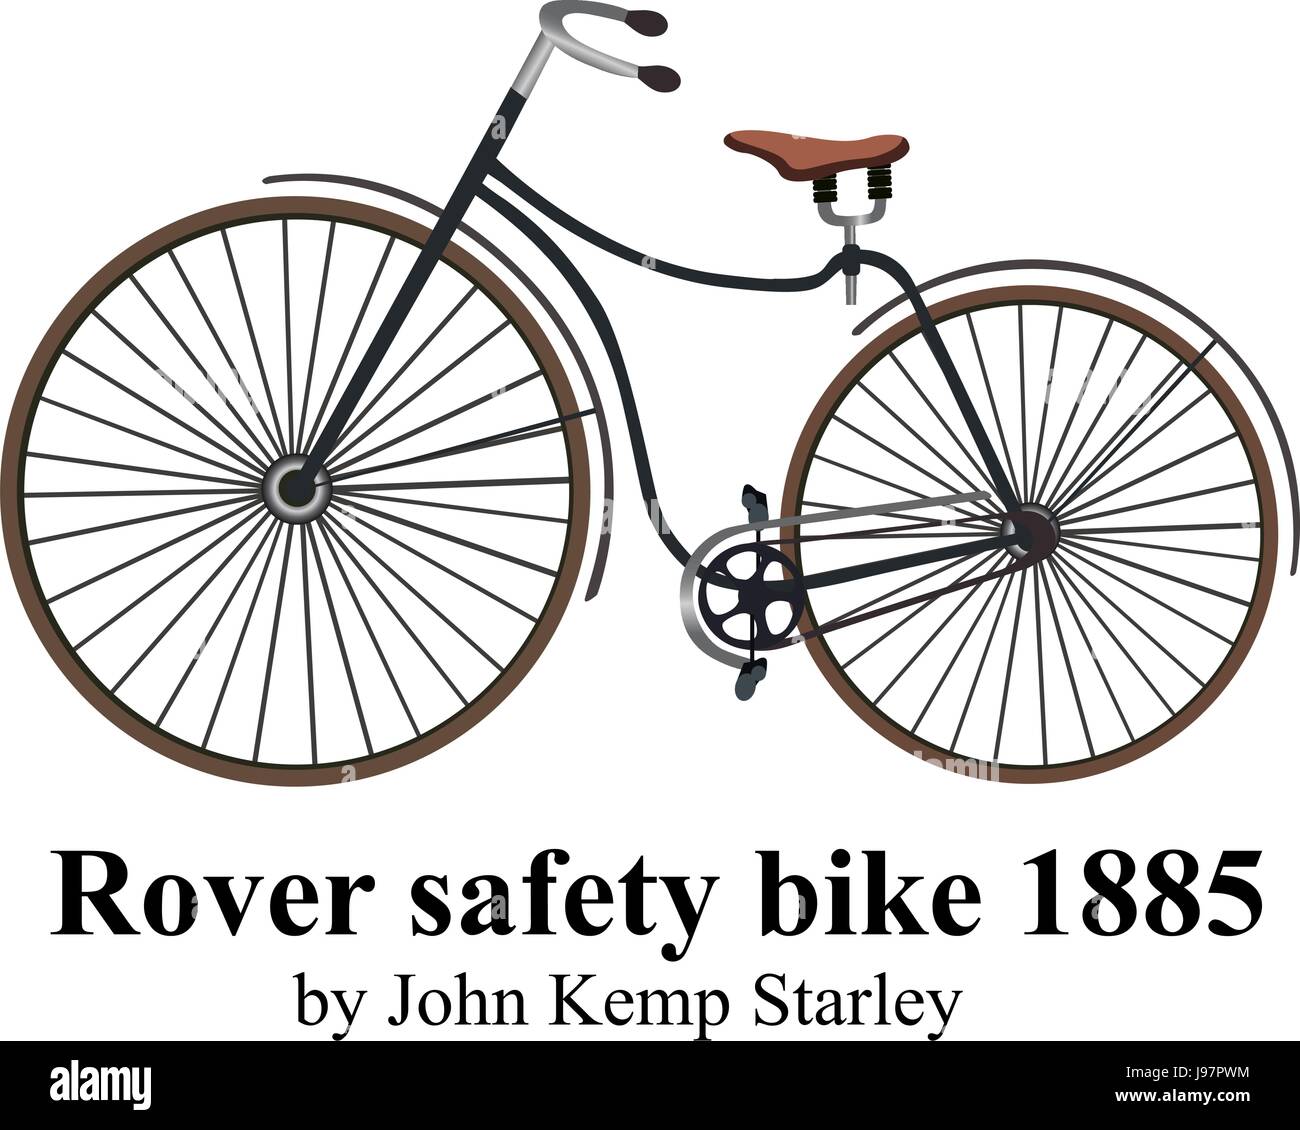 1885 bicycle Stock Vector Images - Alamy